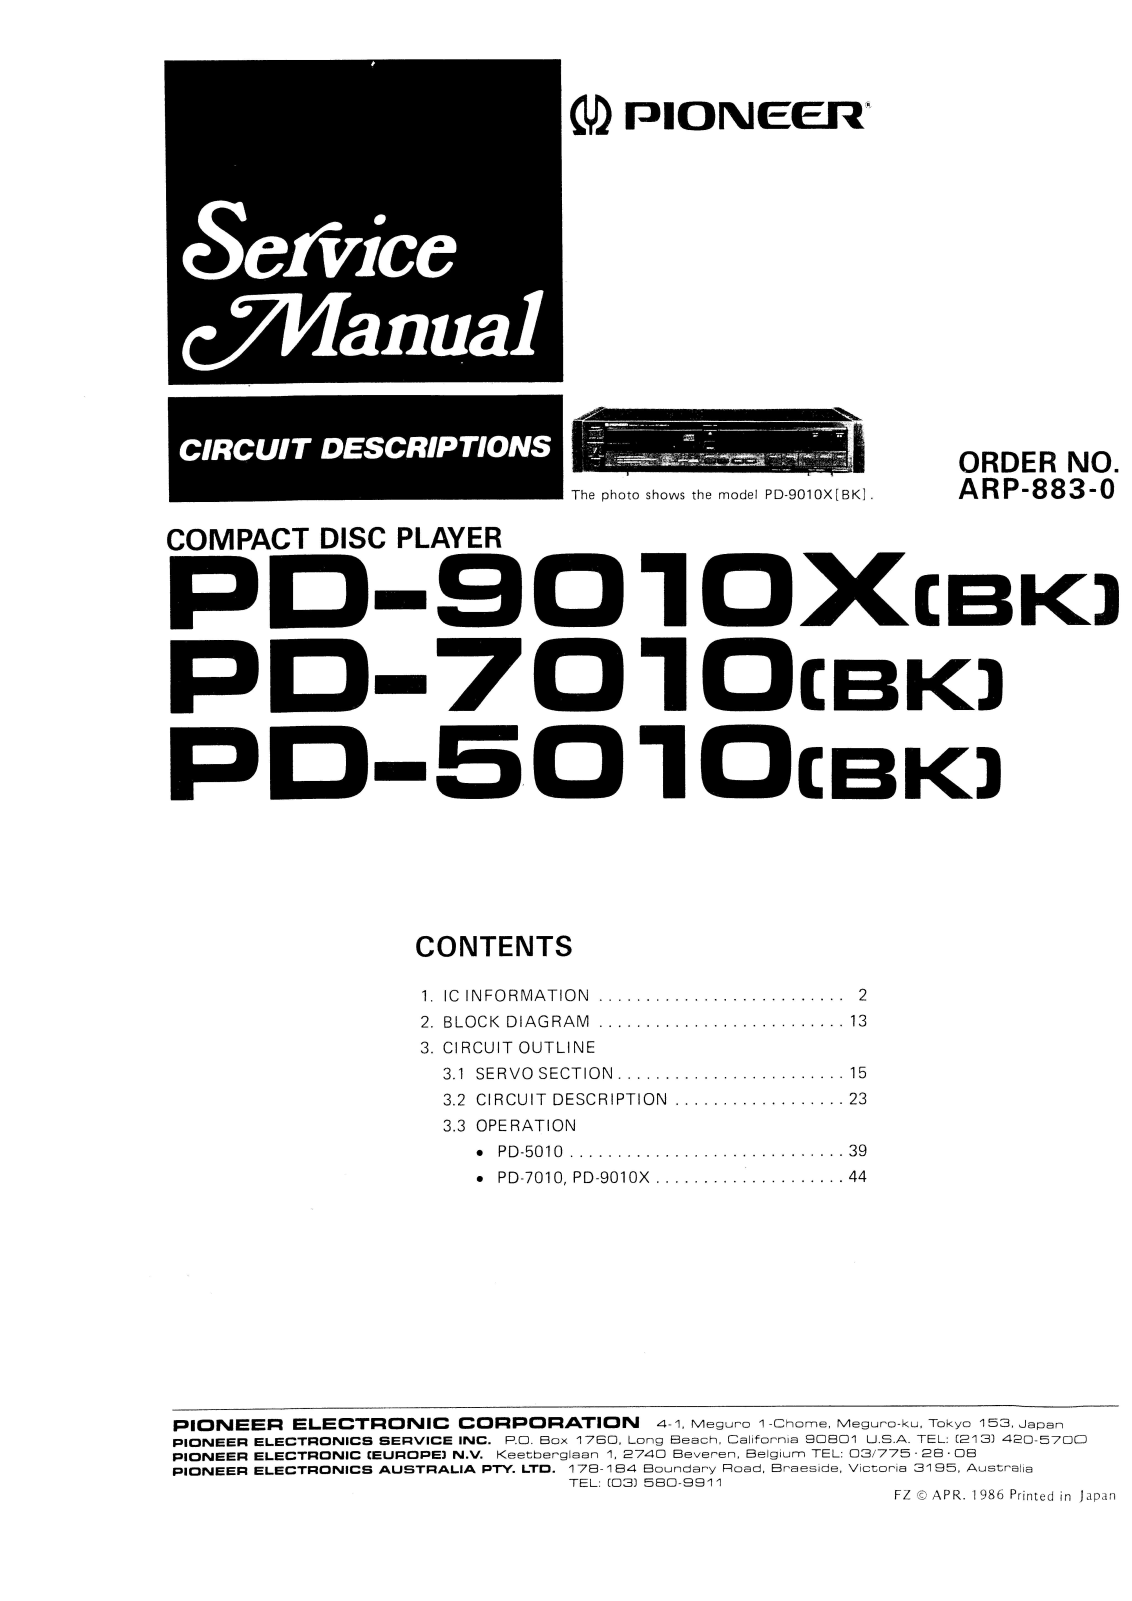 Pioneer PD-5010, PD-7010, PD-9010 Schematic